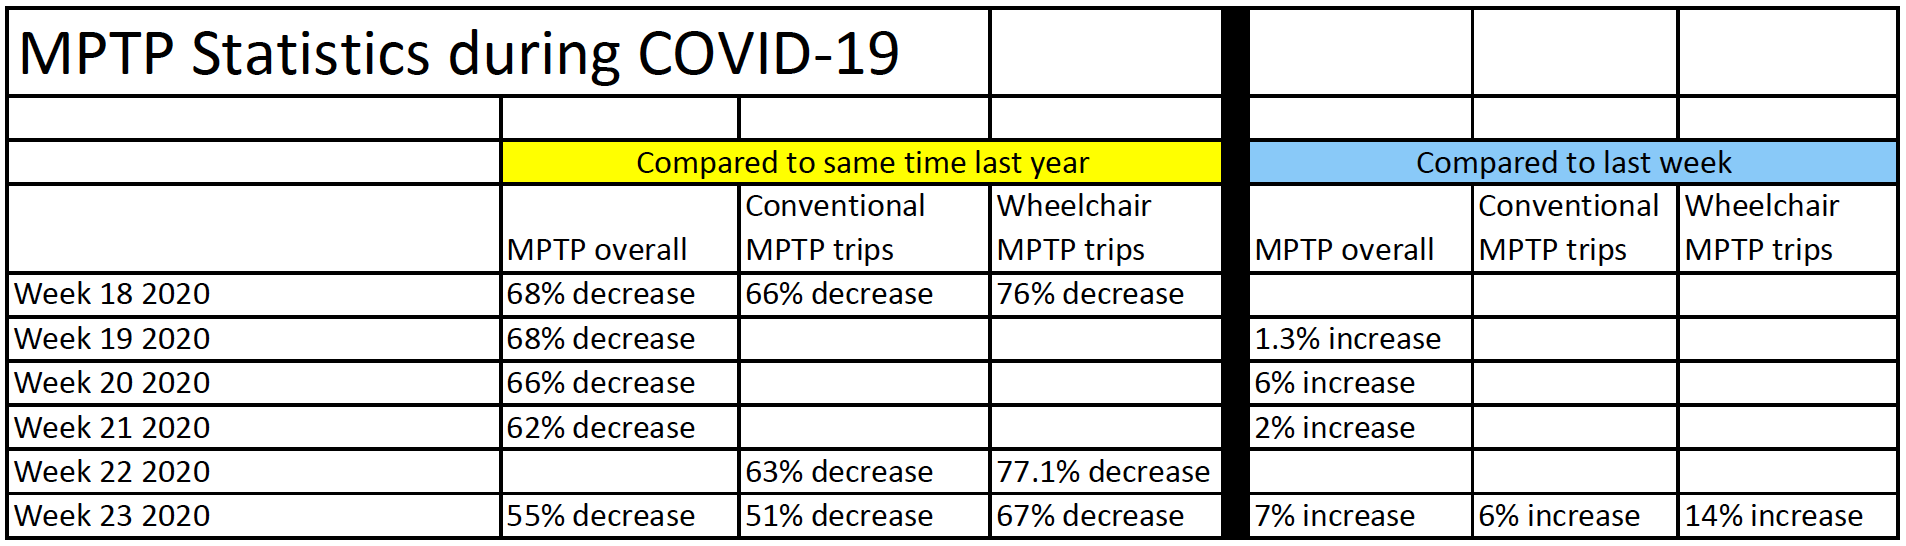 MPTP Stats during COVID-19